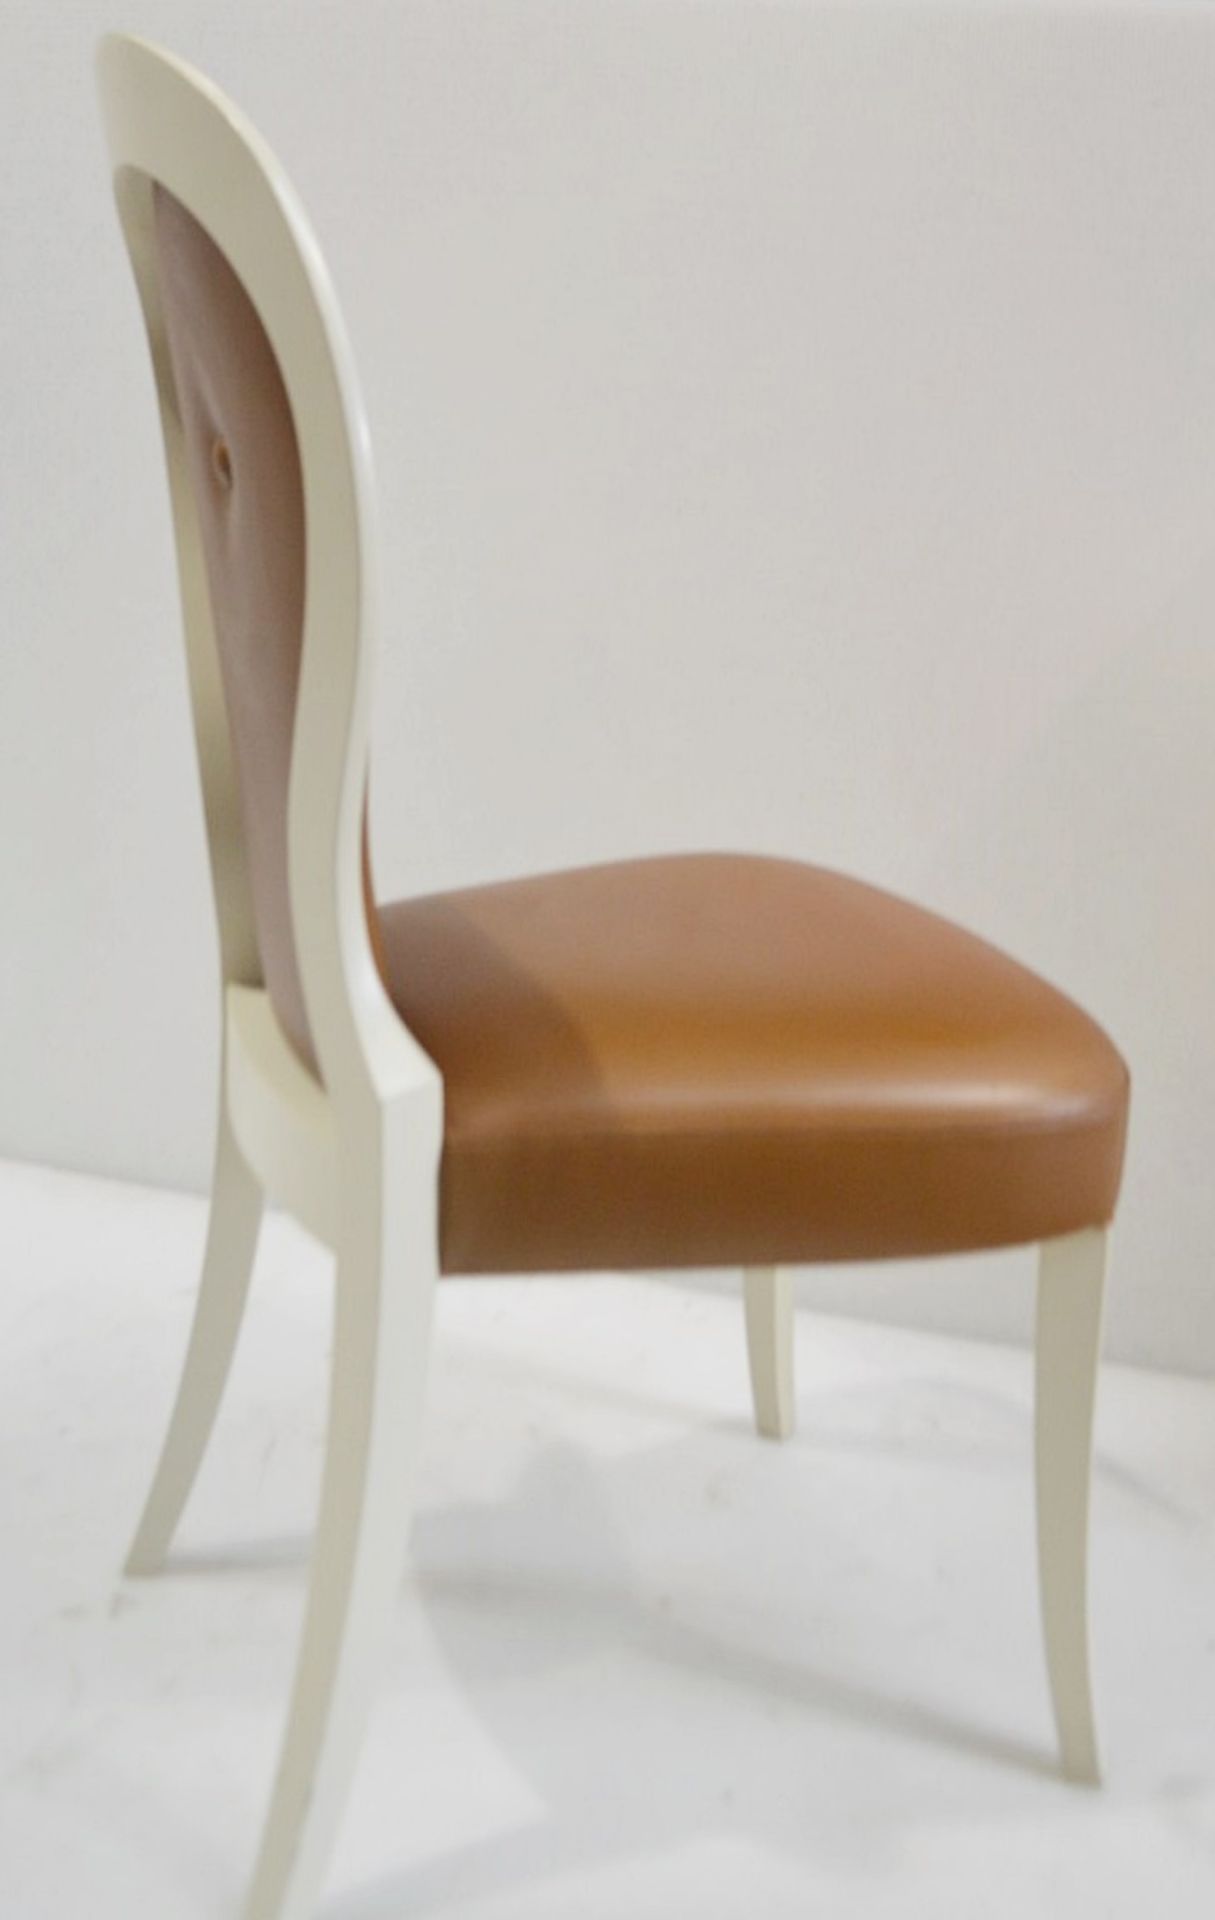 1 x Cushion Backed Chair With Curved Legs - Dimensions: H100 x W49 x D50cm / Seat 48cm - Ref: HMS126 - Image 4 of 7